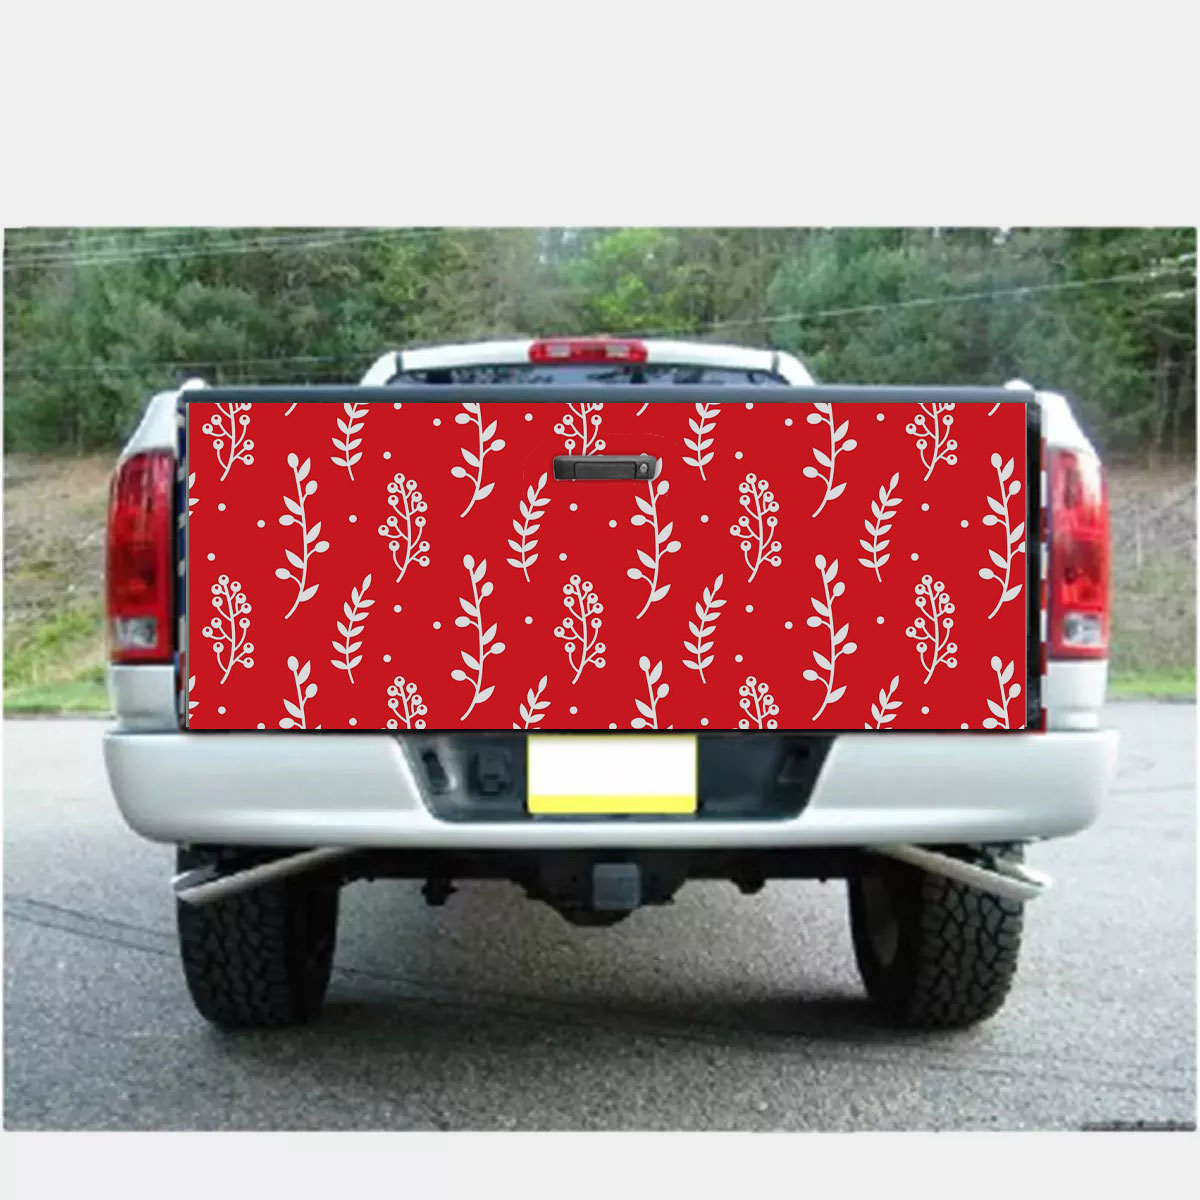 Christmas Mistletoe And Leaf, Mistletoe Clipart On Red Truck Bed Decal